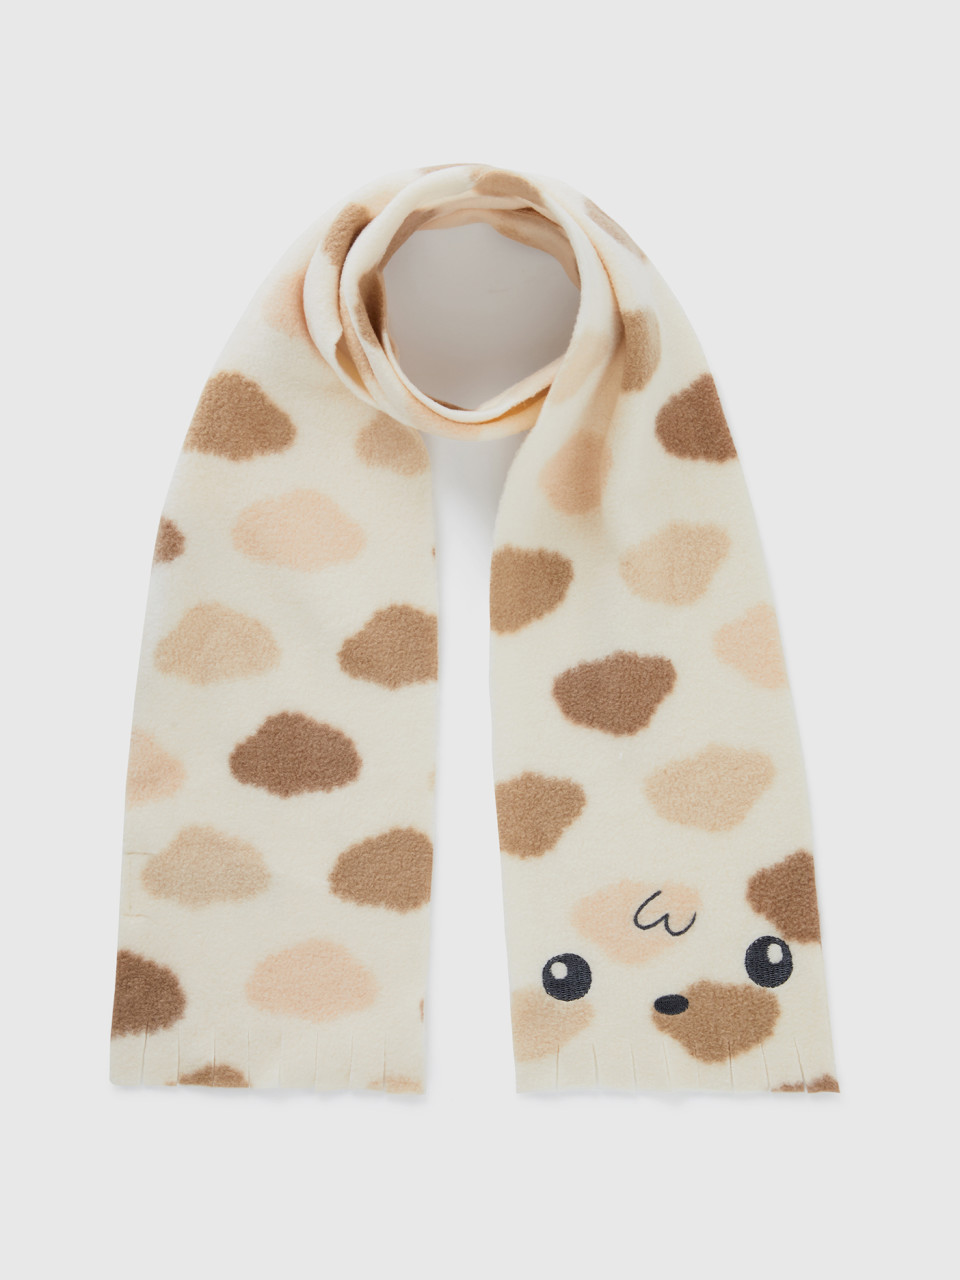 Benetton, Scarf With Cloud Print, Multi-color, Kids